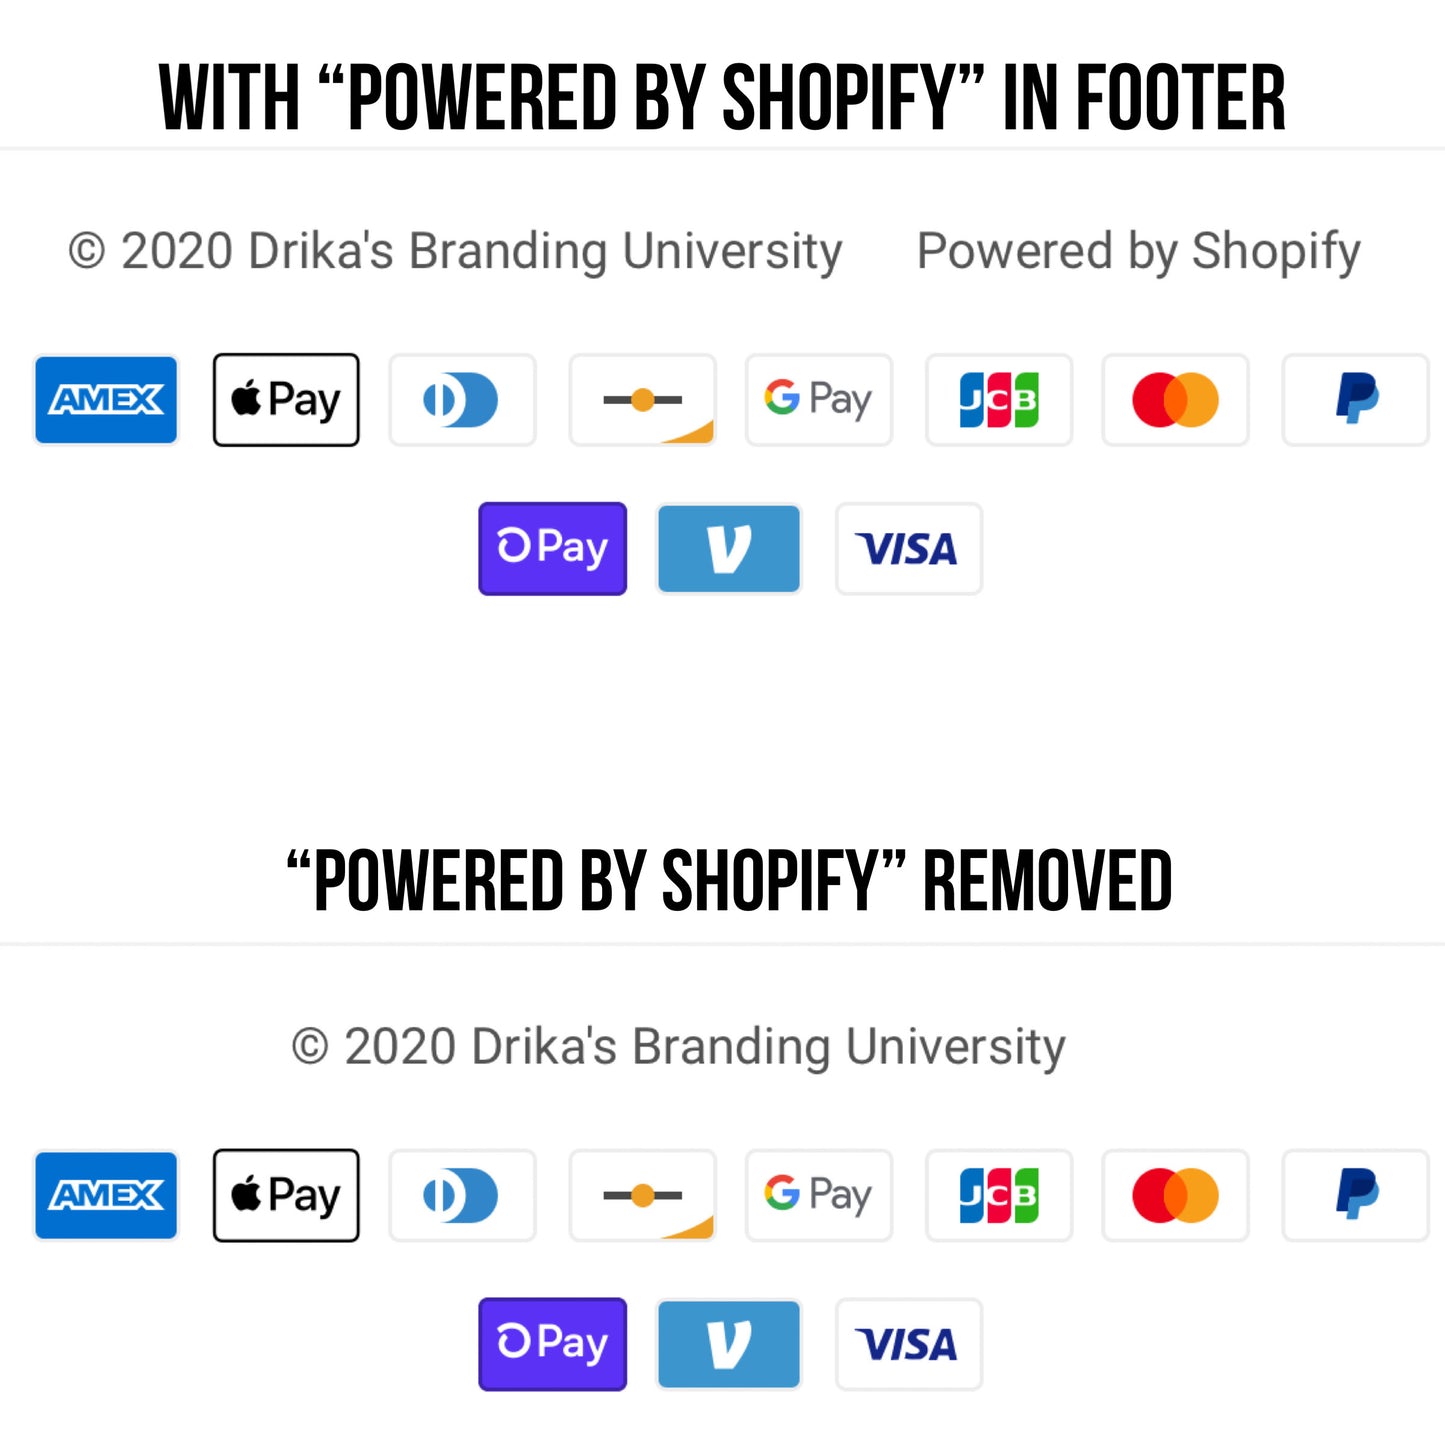 Remove Powered by Shopify in Footer